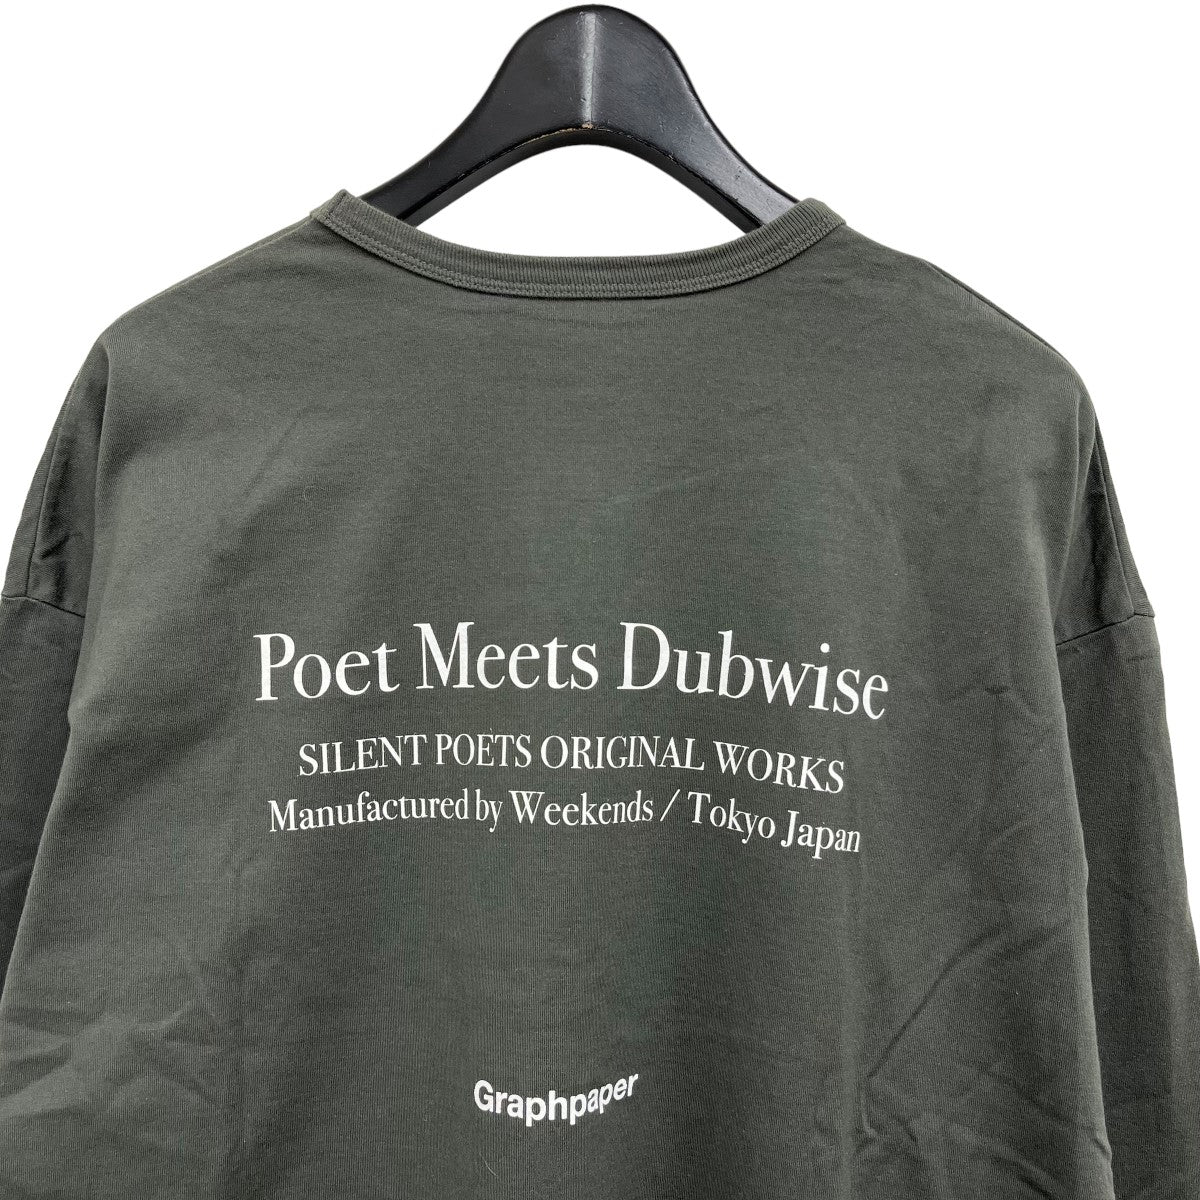 Graphpaper(グラフペーパー) Poet Meets Dubwise for GP Jersey L S Tee SUNロングスリーブTシャツ